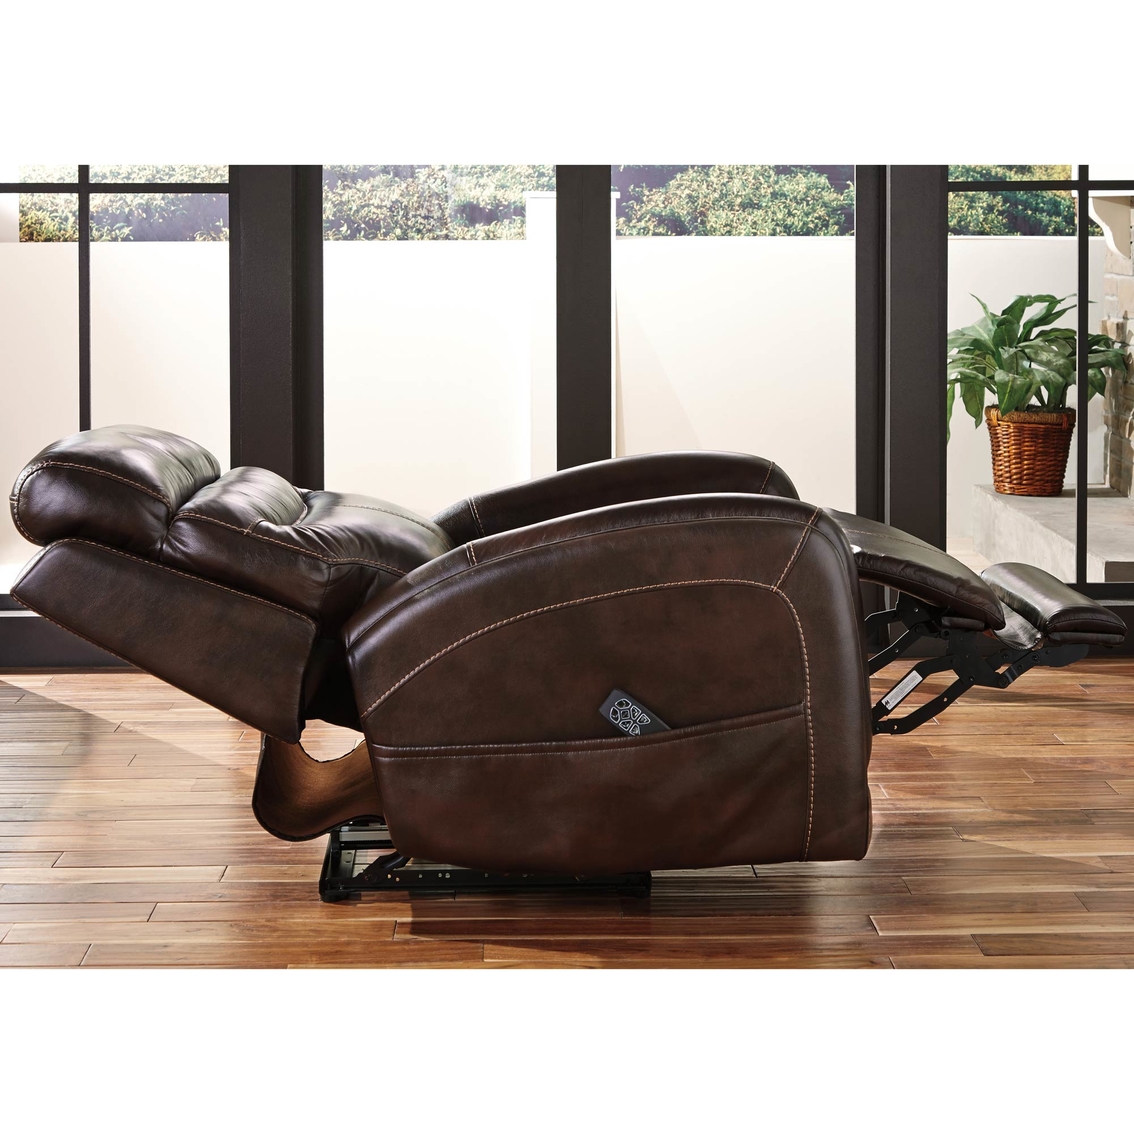 Ashley Ailor Leather Power Recliner with Power Adjusting Headrest - Image 2 of 4